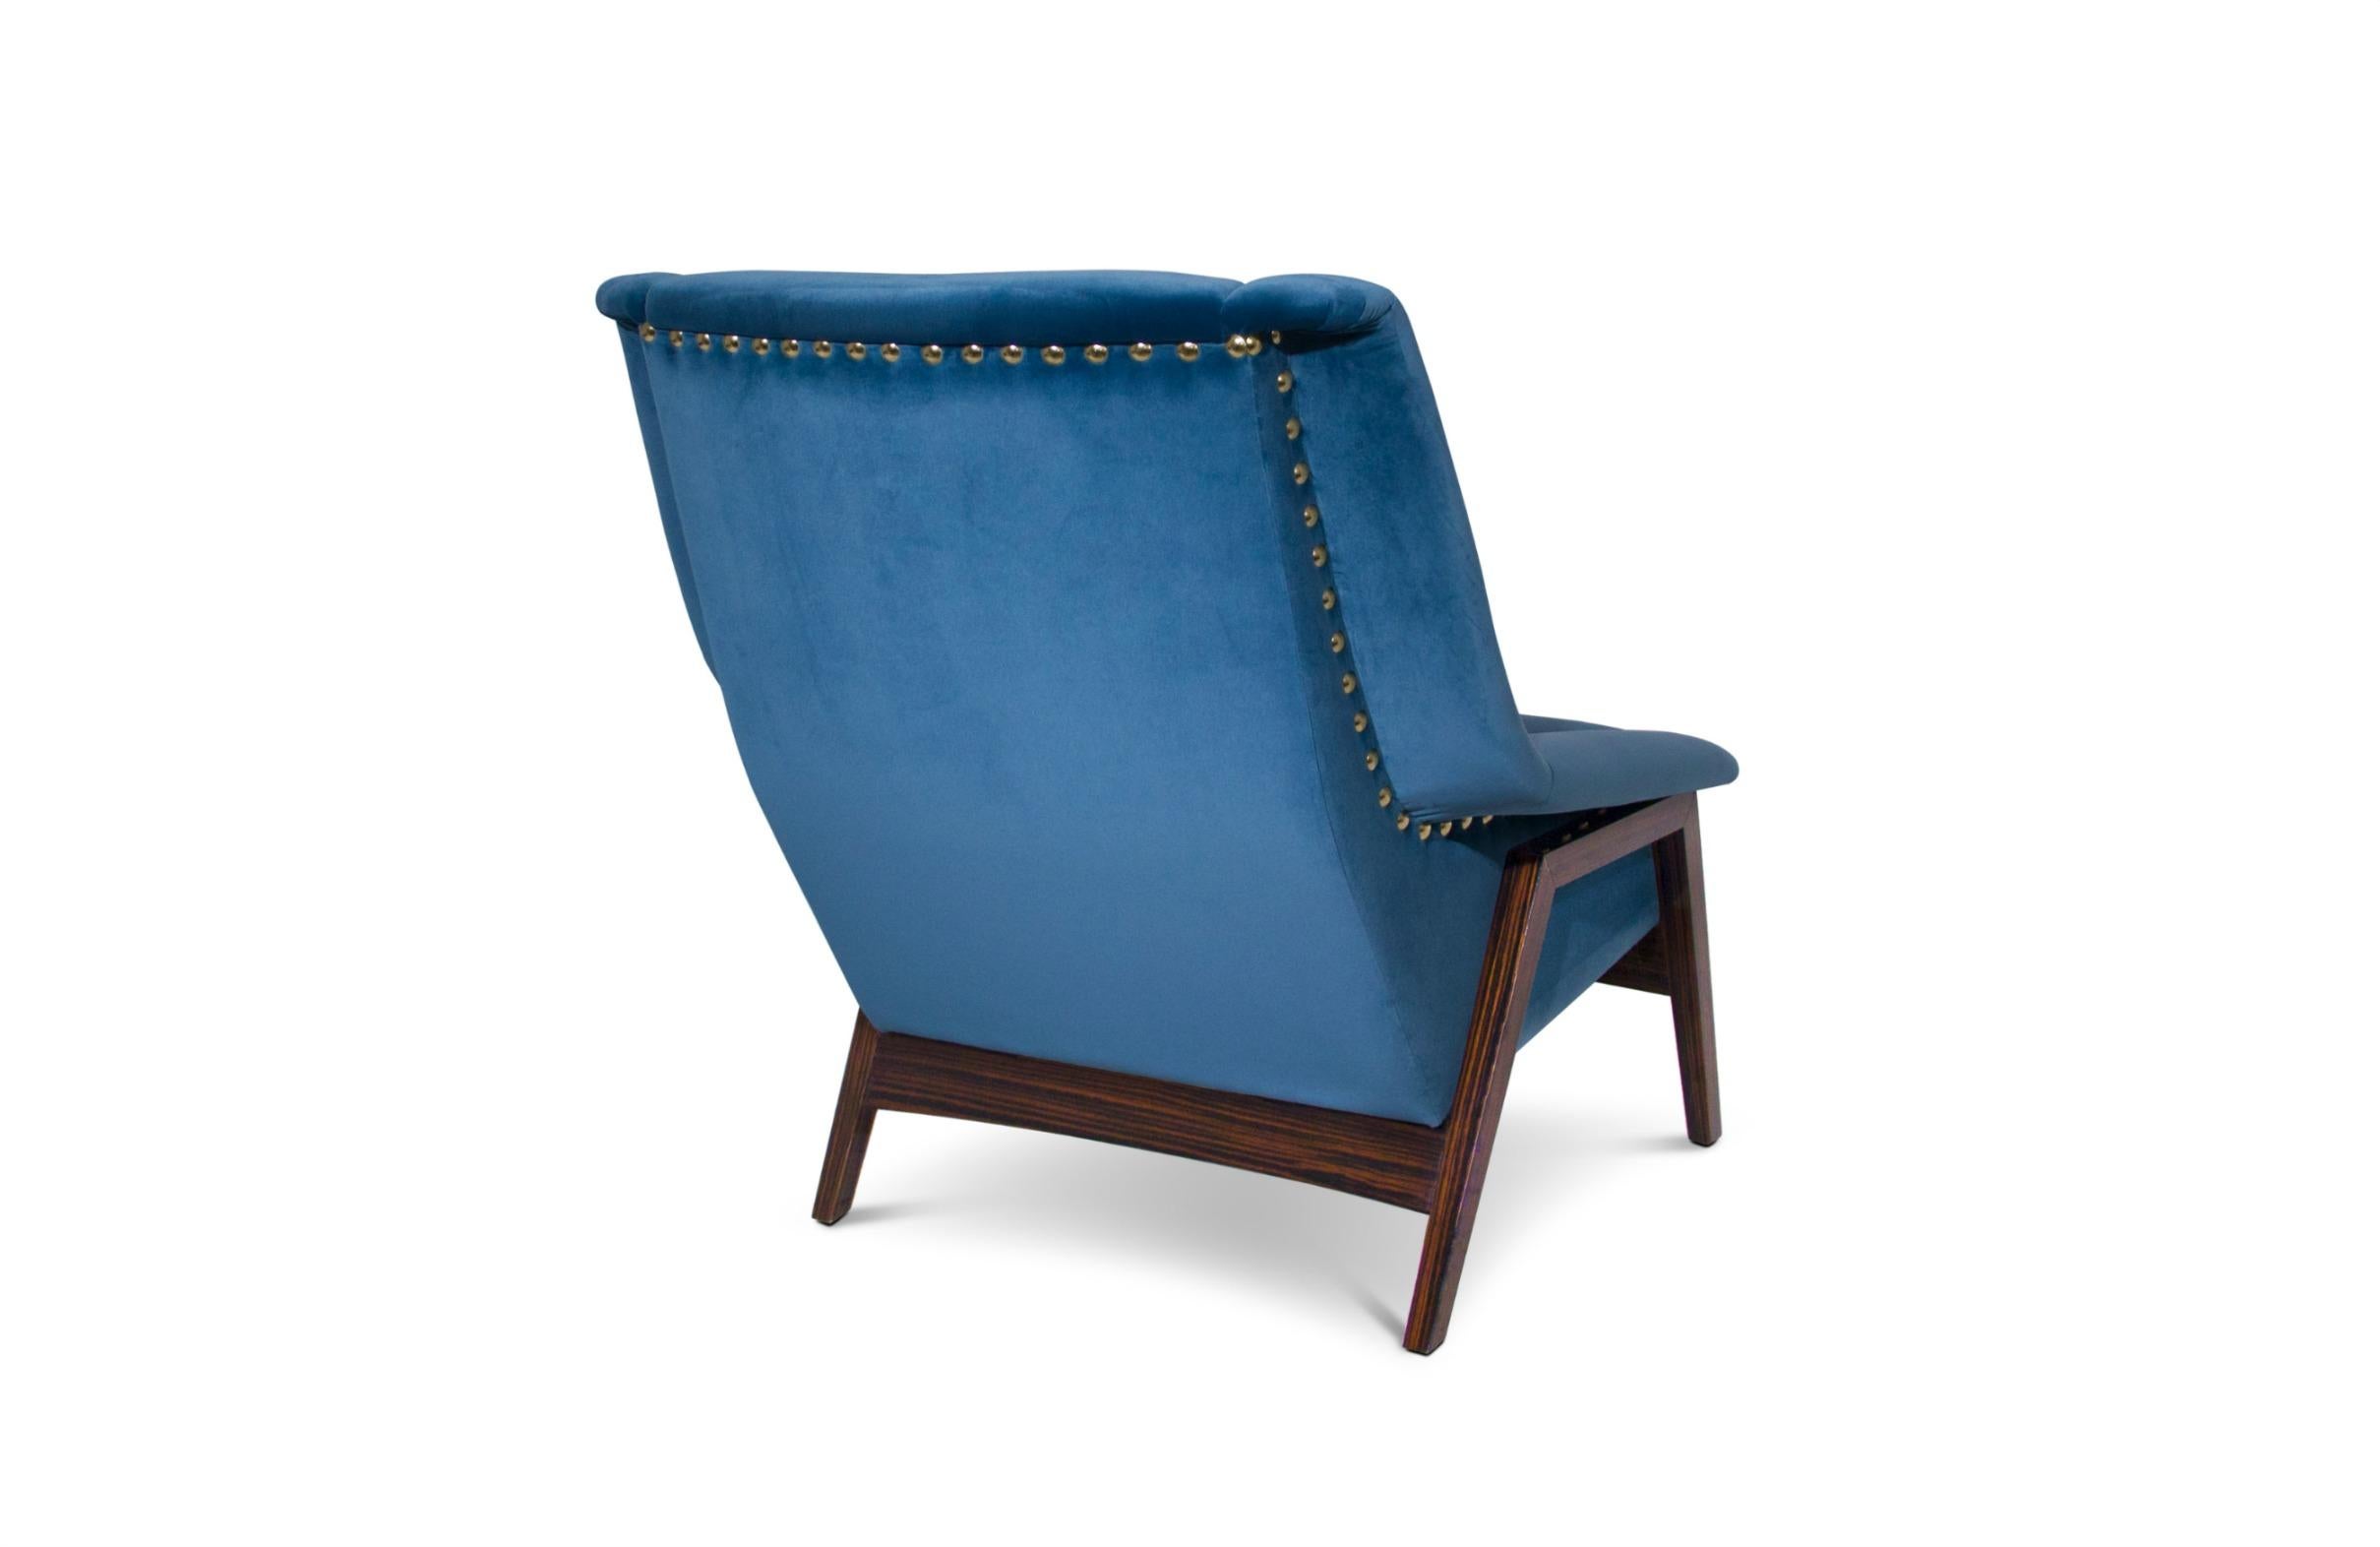 Inca Armchair in Cotton Velvet and Wood Veneer Legs by Brabbu In New Condition For Sale In New York, NY